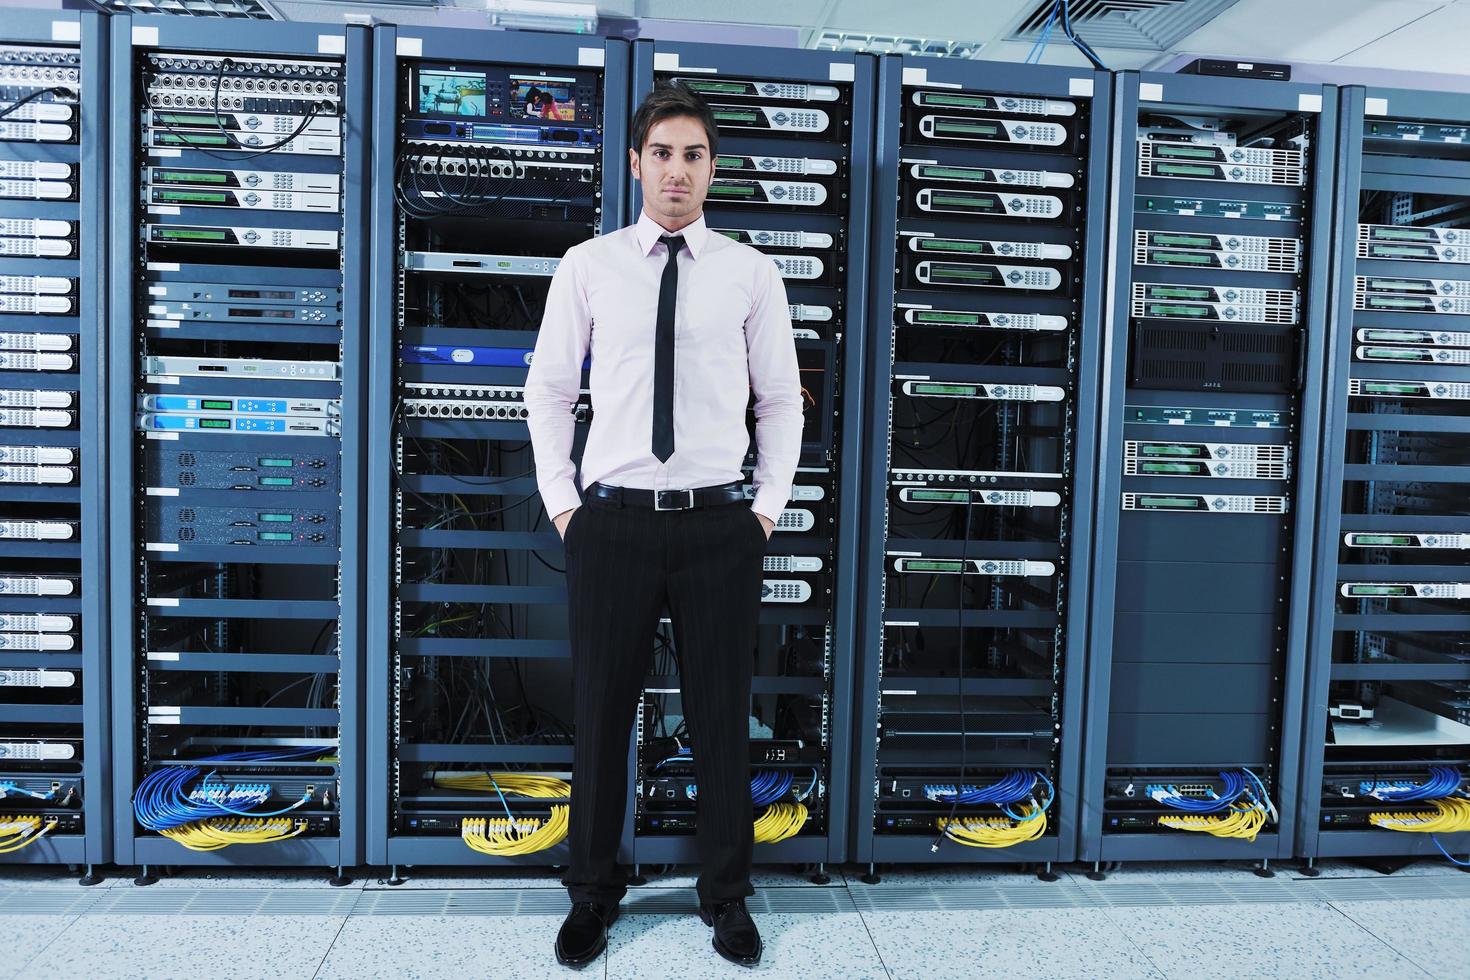 young it engineer in datacenter server room photo